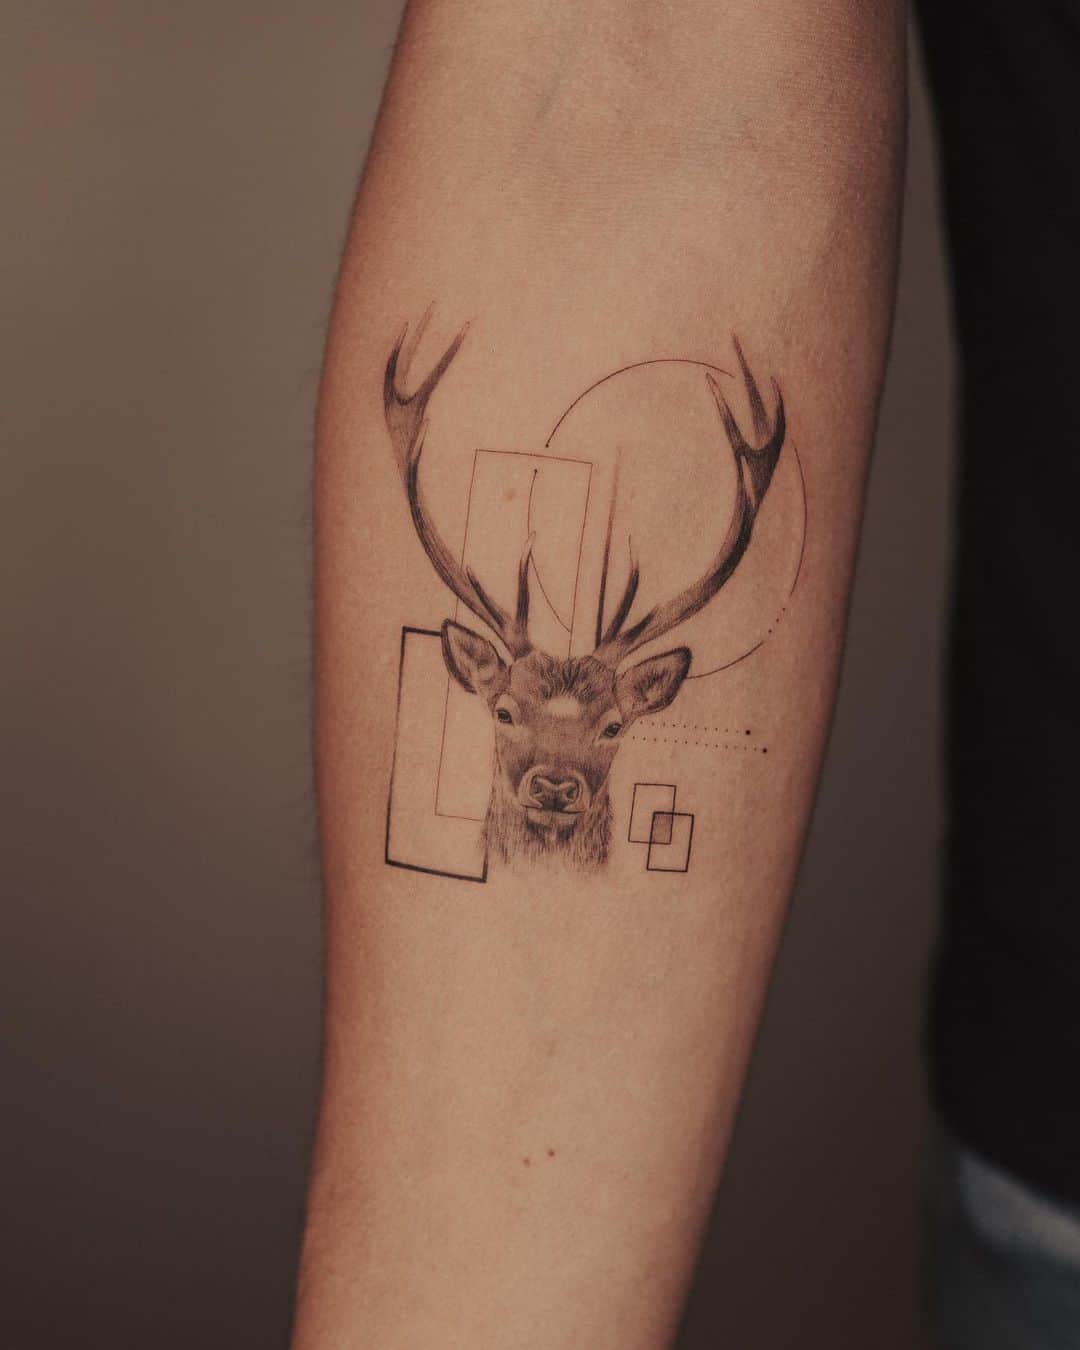 Geometrical deer tattoo with horn-shaped numbers on Craiyon